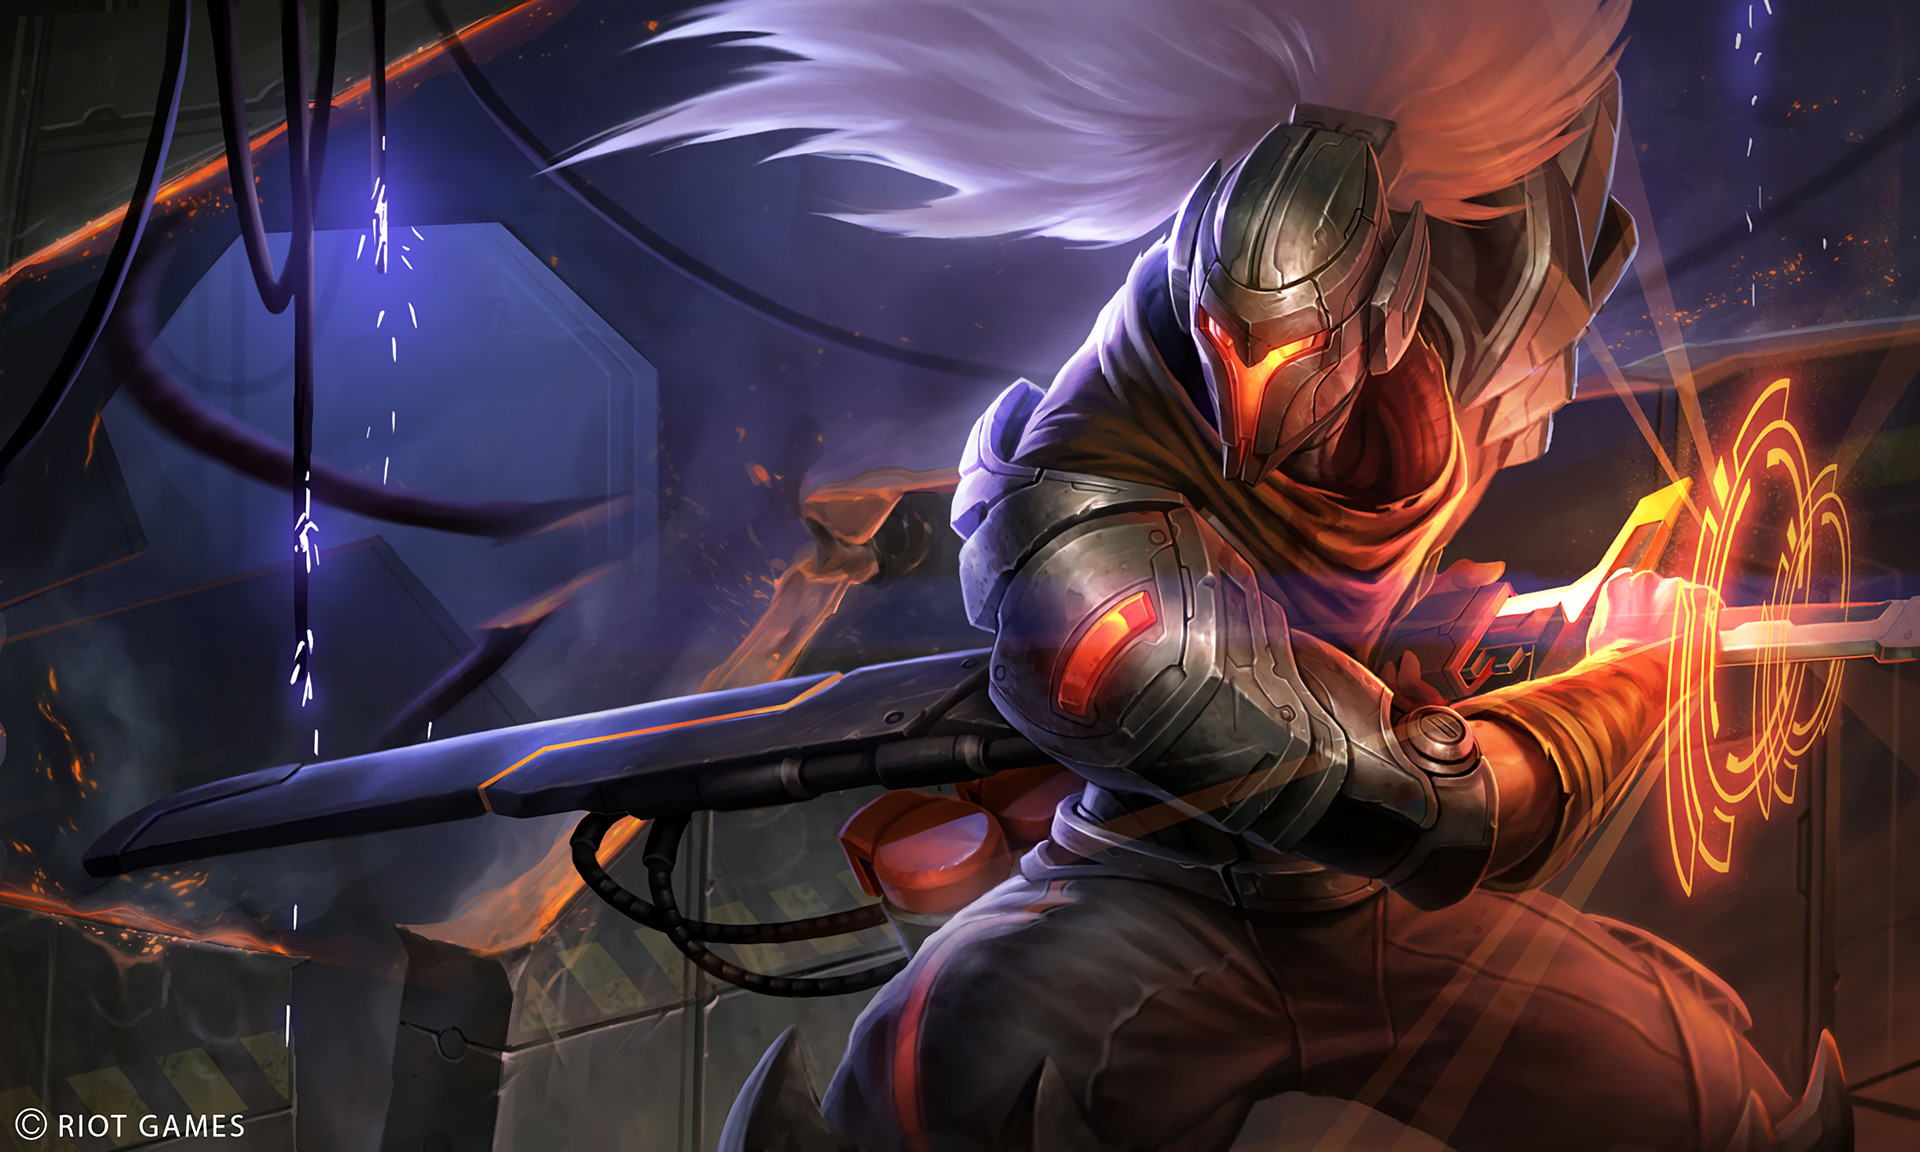 Yasuo Wallpapers (68+ images)